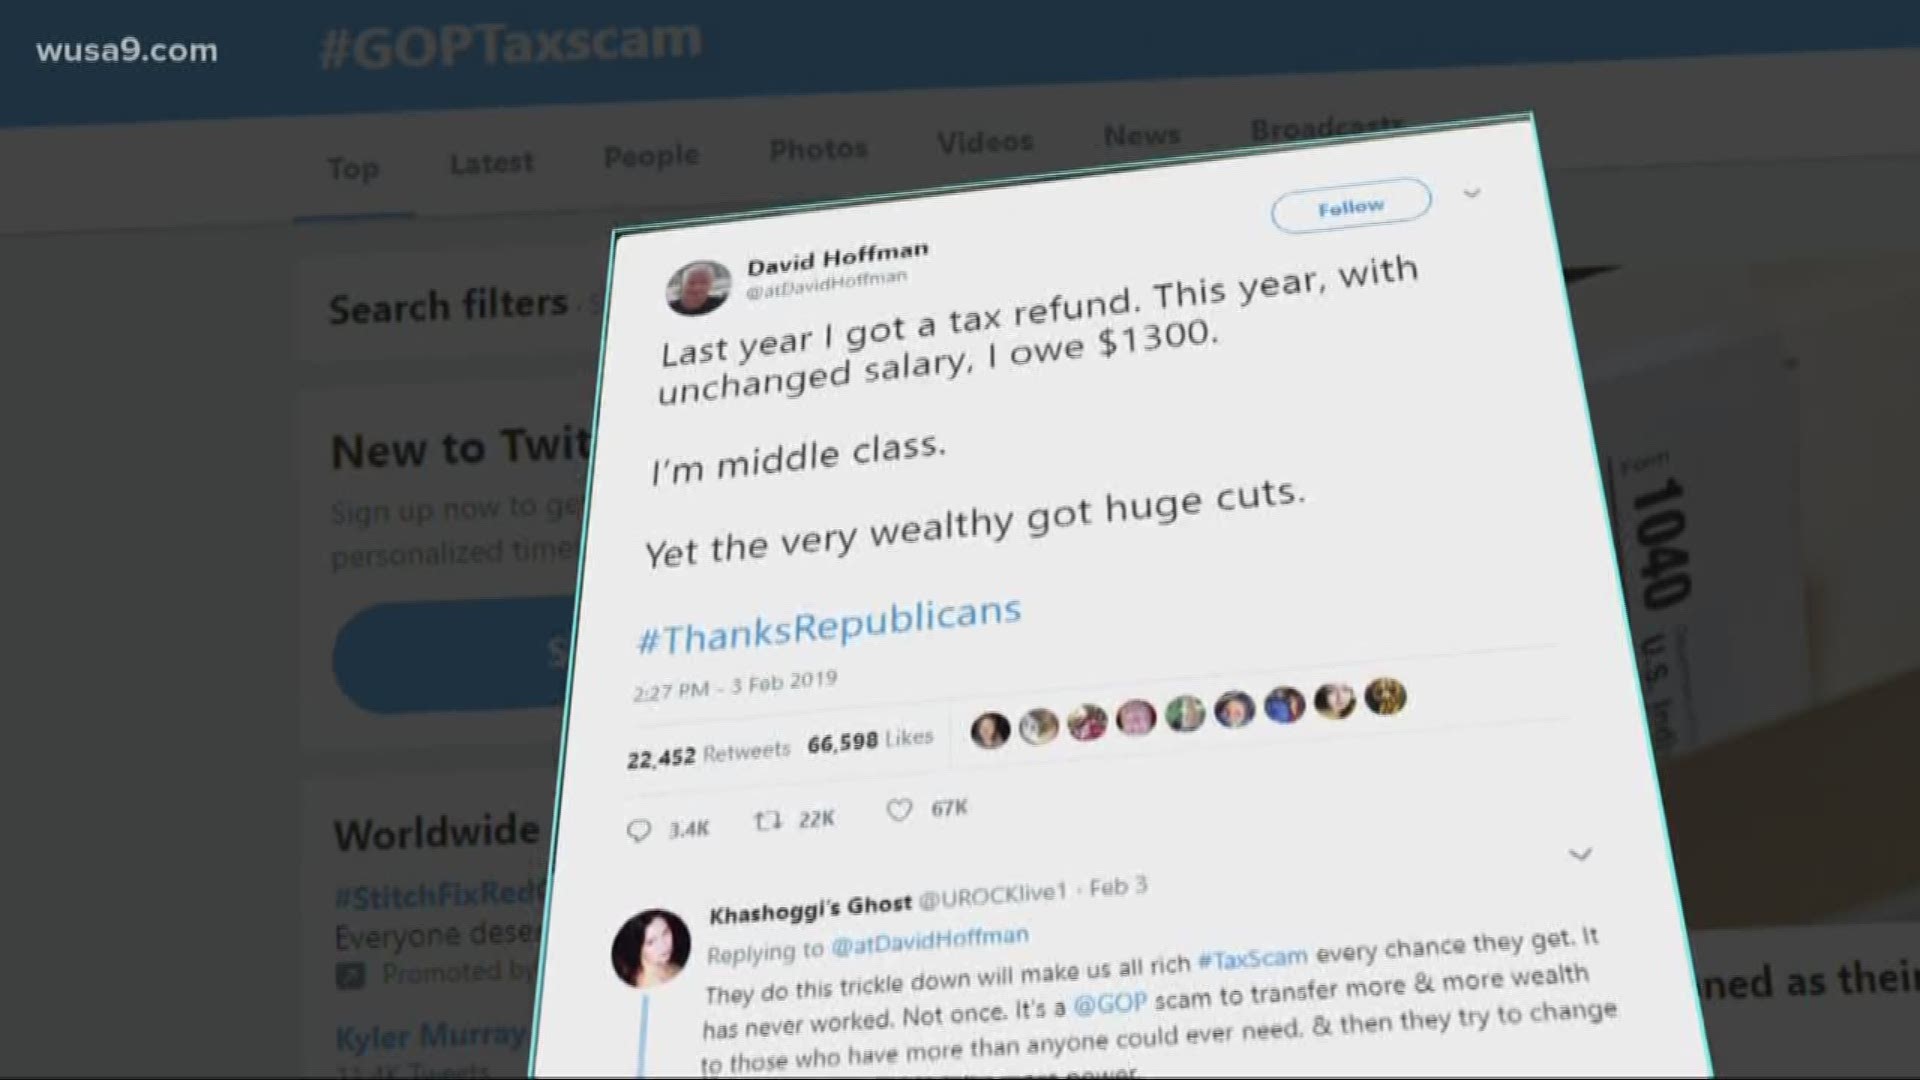 With the hashtags #TaxScam and #GOPTaxScam, people who've figured their taxes and found they're getting a smaller refund or actually owe money are venting their fury at the 2017 tax overhaul.